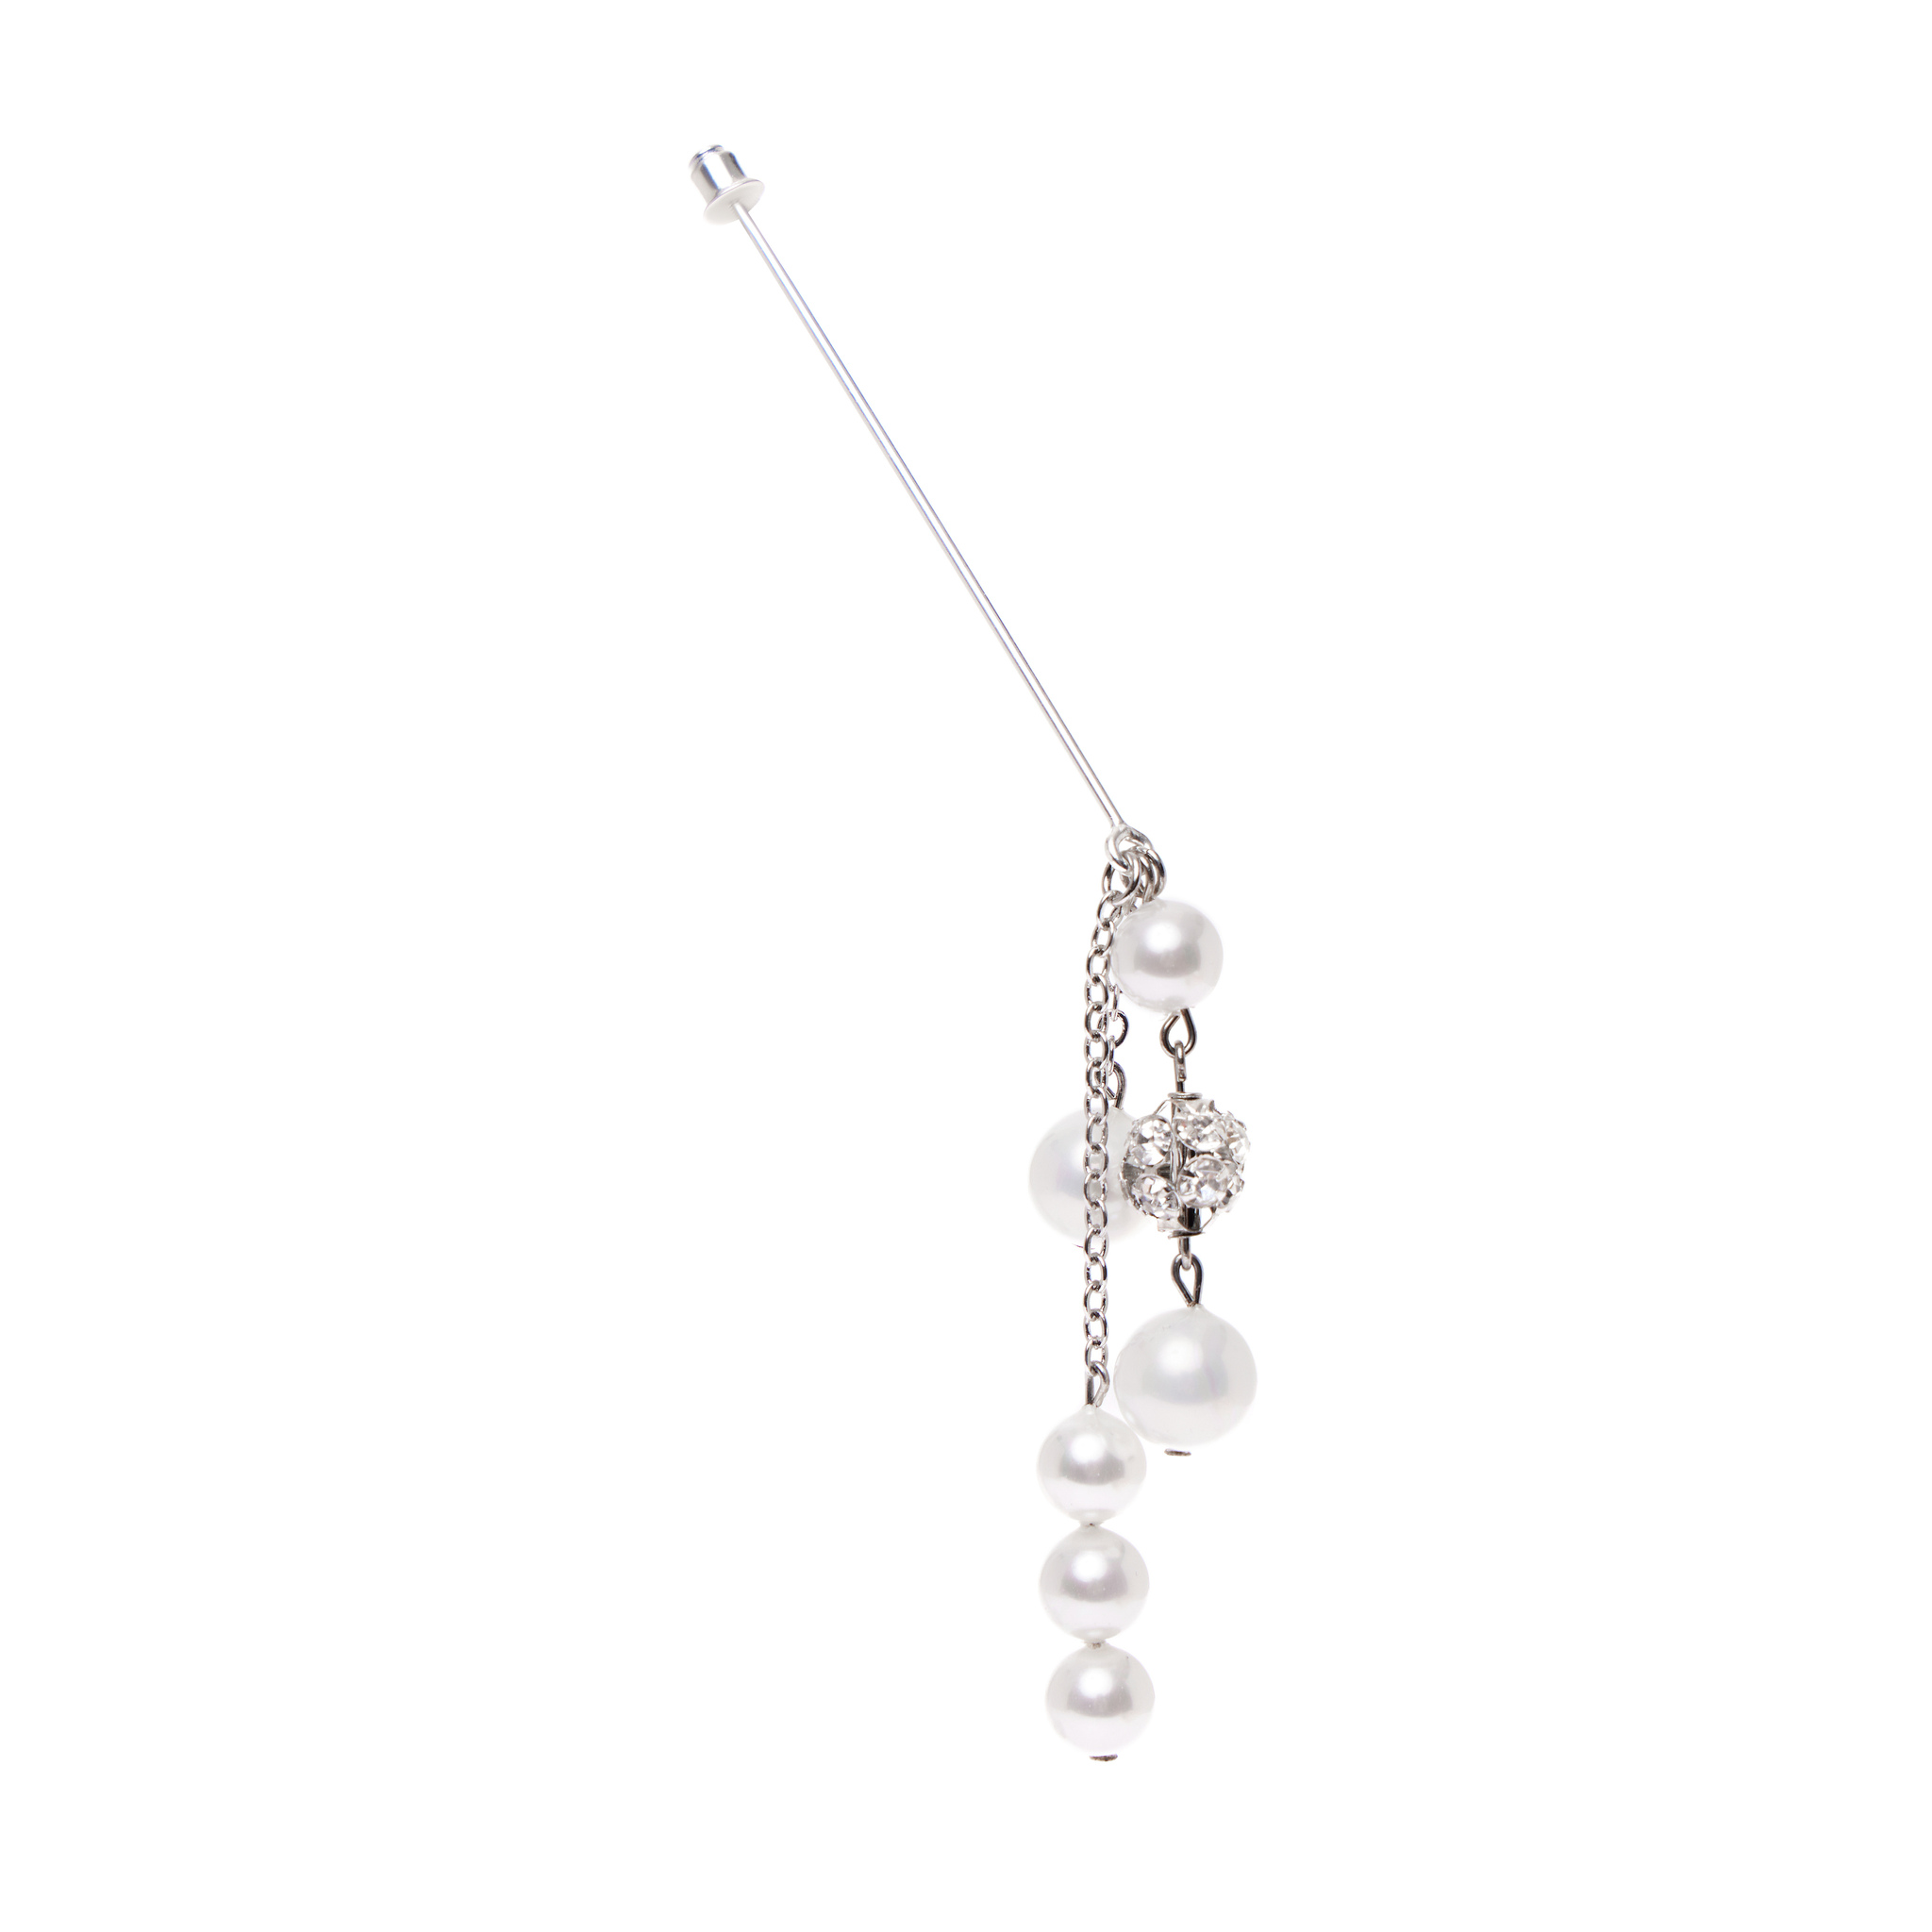 HOLLY JUNE Брошь Pearly Nuance Brooch holly june серьга pearly bow earring